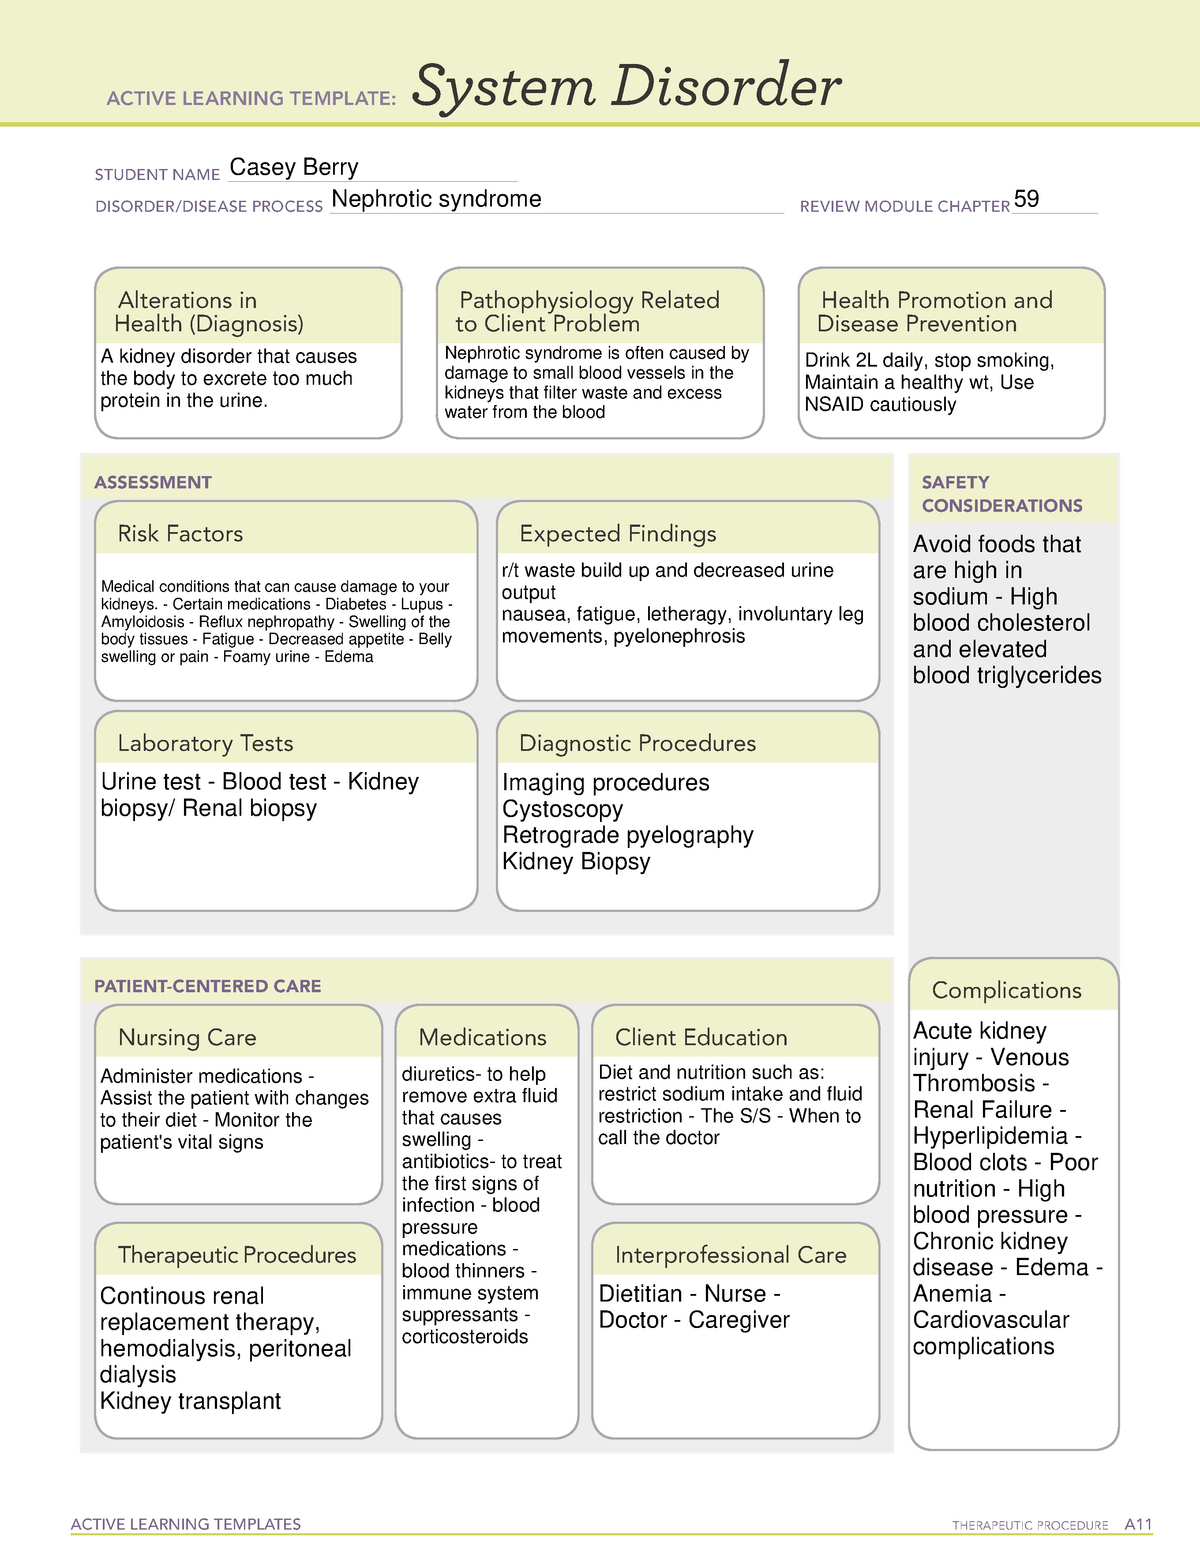 Nephrotic syndrome Chapter 59 ATI ALT ACTIVE LEARNING TEMPLATES